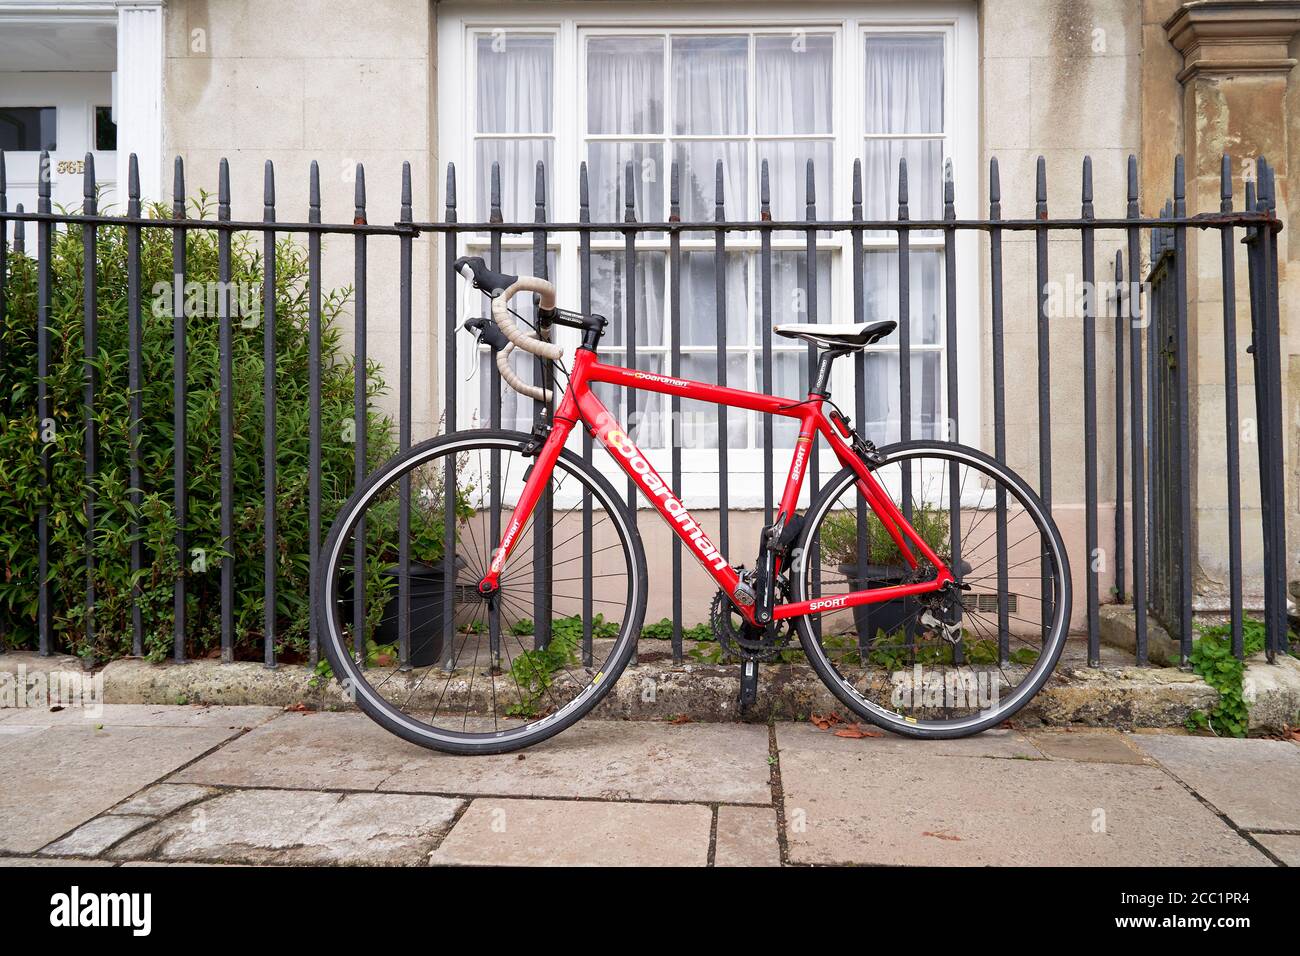 Red Boardman bicycle leaning against metal fence Stock Photo